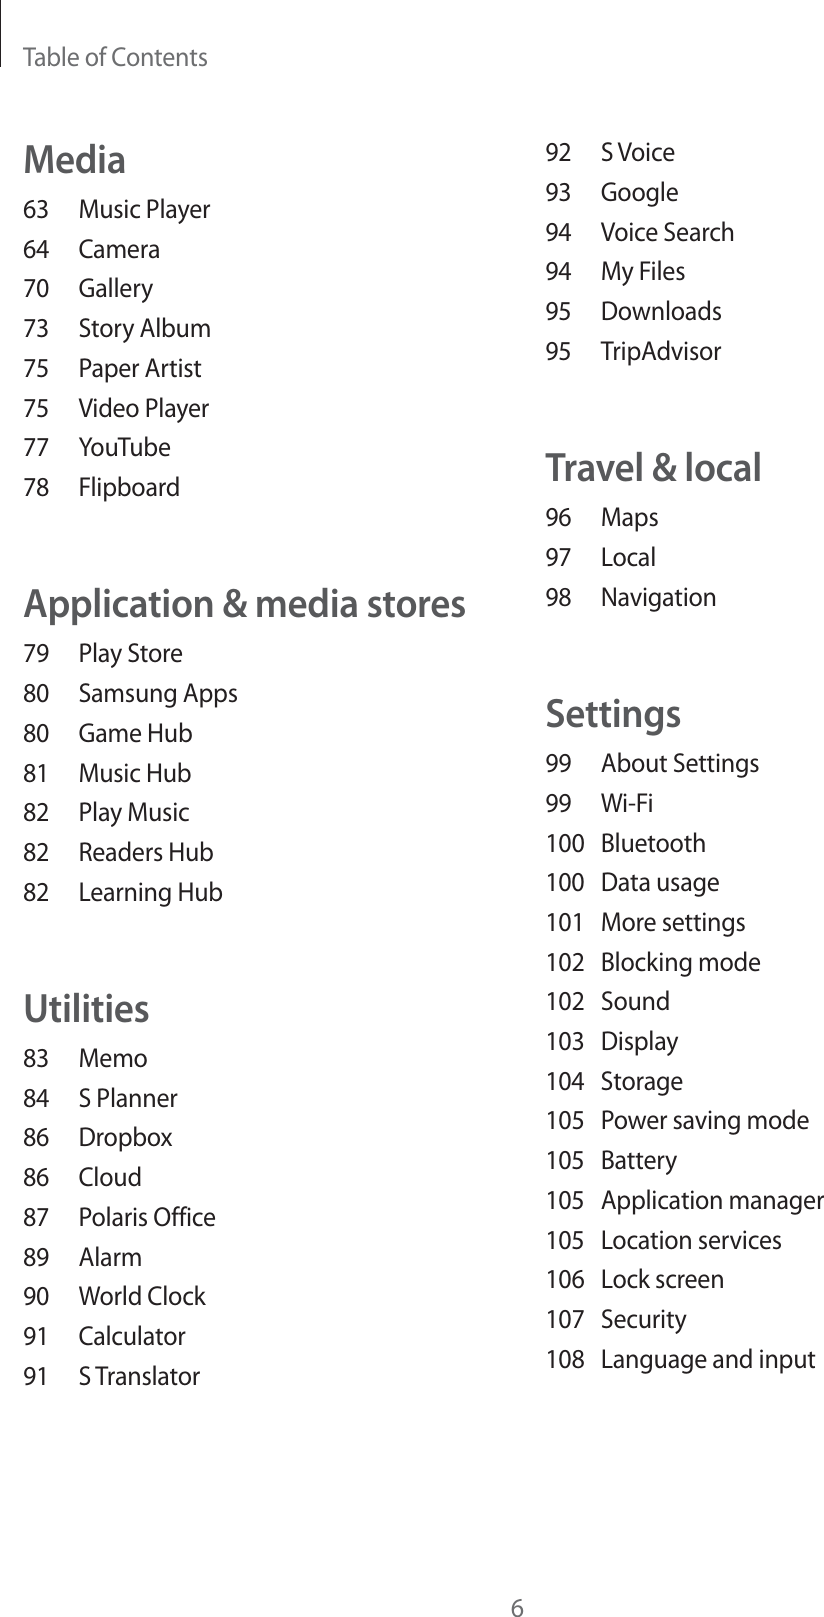 Table of Contents692 S Voice93 Google94 Voice Search94 My Files95 Downloads95 TripAdvisorTravel &amp; local96 Maps97 Local98 NavigationSettings99 About Settings99 Wi-Fi100 Bluetooth100 Data usage101 More settings102 Blocking mode102 Sound103 Display104 Storage105  Power saving mode105 Battery105 Application manager105 Location services106 Lock screen107 Security108  Language and inputMedia63 Music Player64 Camera70 Gallery73 Story Album75 Paper Artist75 Video Player77 YouTube78 FlipboardApplication &amp; media stores79 Play Store80 Samsung Apps80 Game Hub81 Music Hub82 Play Music82 Readers Hub82 Learning HubUtilities83 Memo84 S Planner86 Dropbox86 Cloud87 Polaris Office89 Alarm90 World Clock91 Calculator91 S Translator